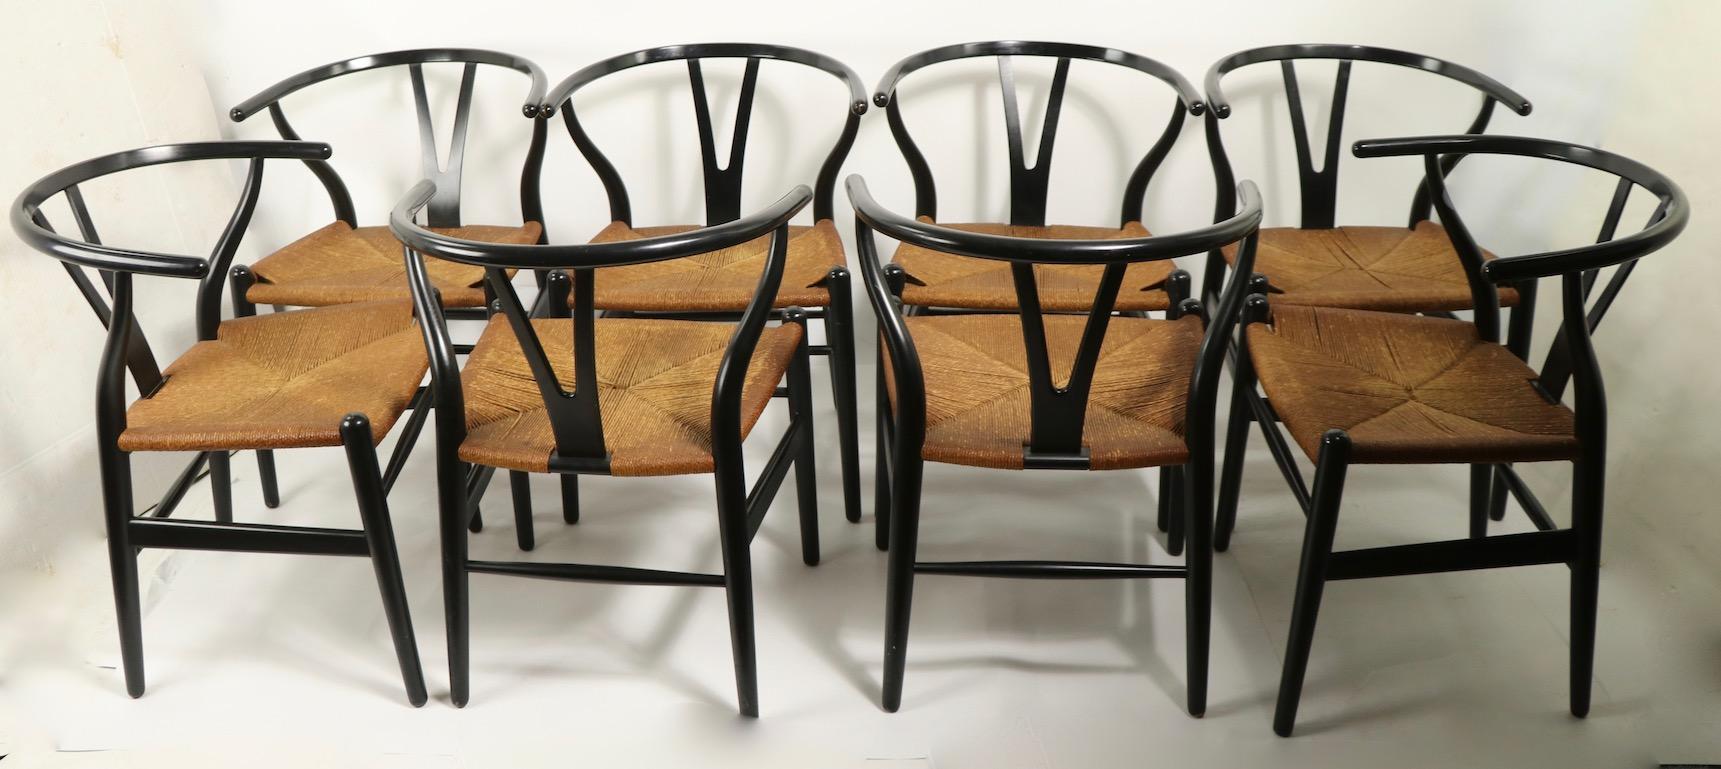 Wonderful set of 8 CH24 chairs designed by Hans Wegner executed by Carl Hansen. These chars are in original black finish with original paper cord seats. All are in very fine condition, showing only light cosmetic wear, normal and consistent with